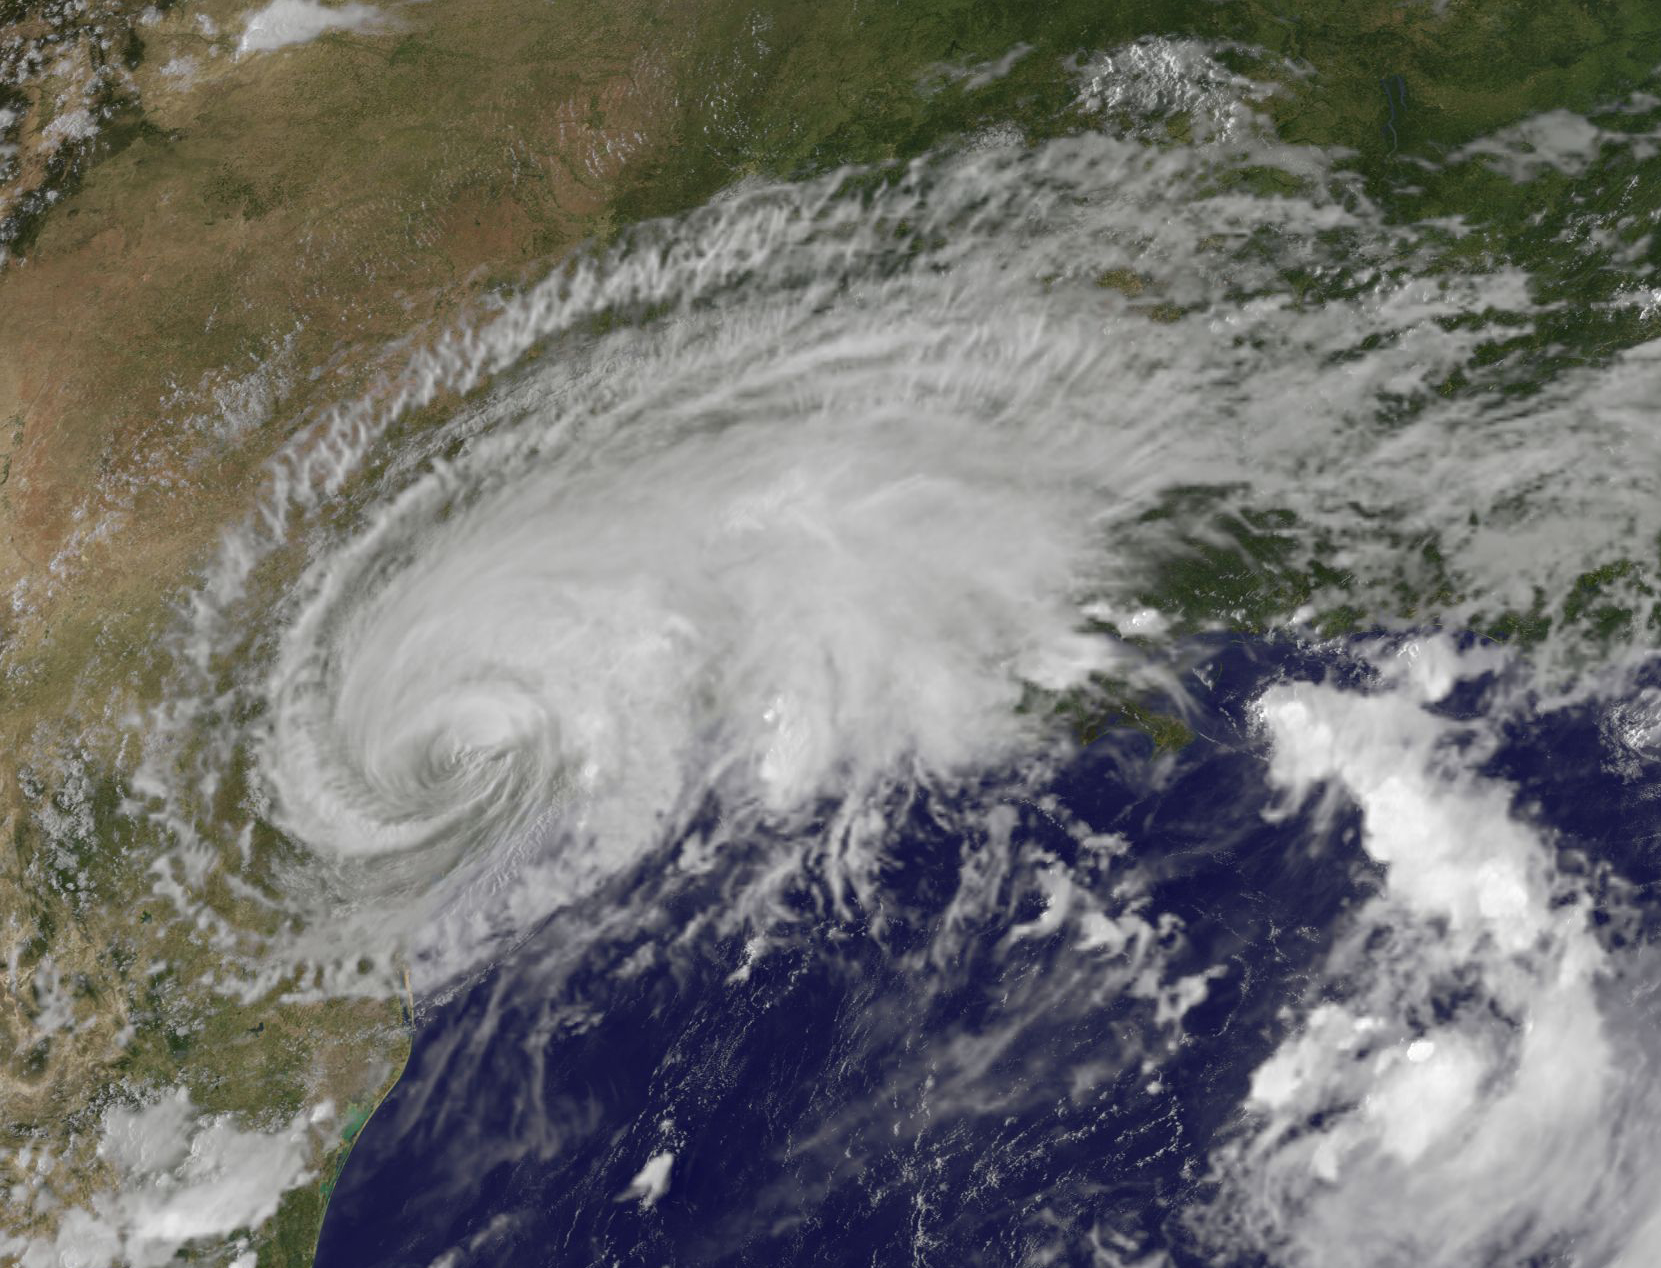 Satellite image of Harvey, a comma shaped swirling cloud mass over the eastern Texas coast.